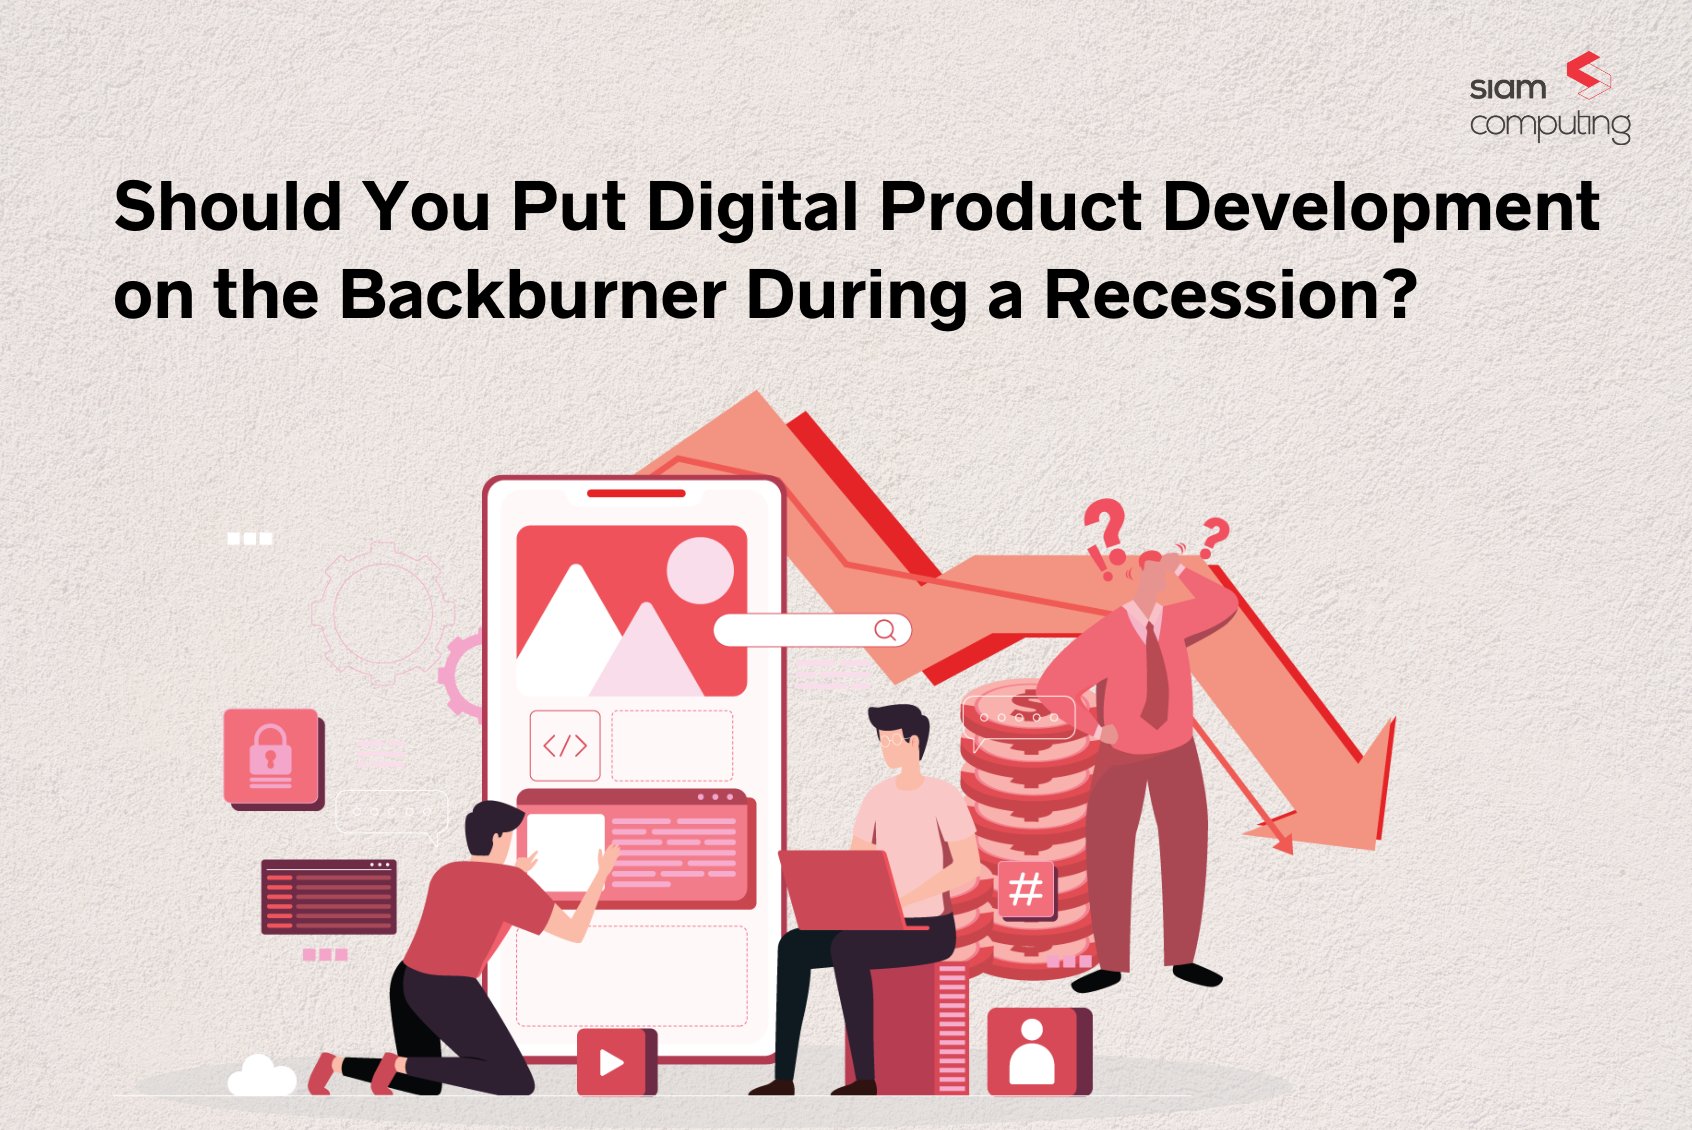 Should You Put Digital Product Development on the Backburner During a Recession?